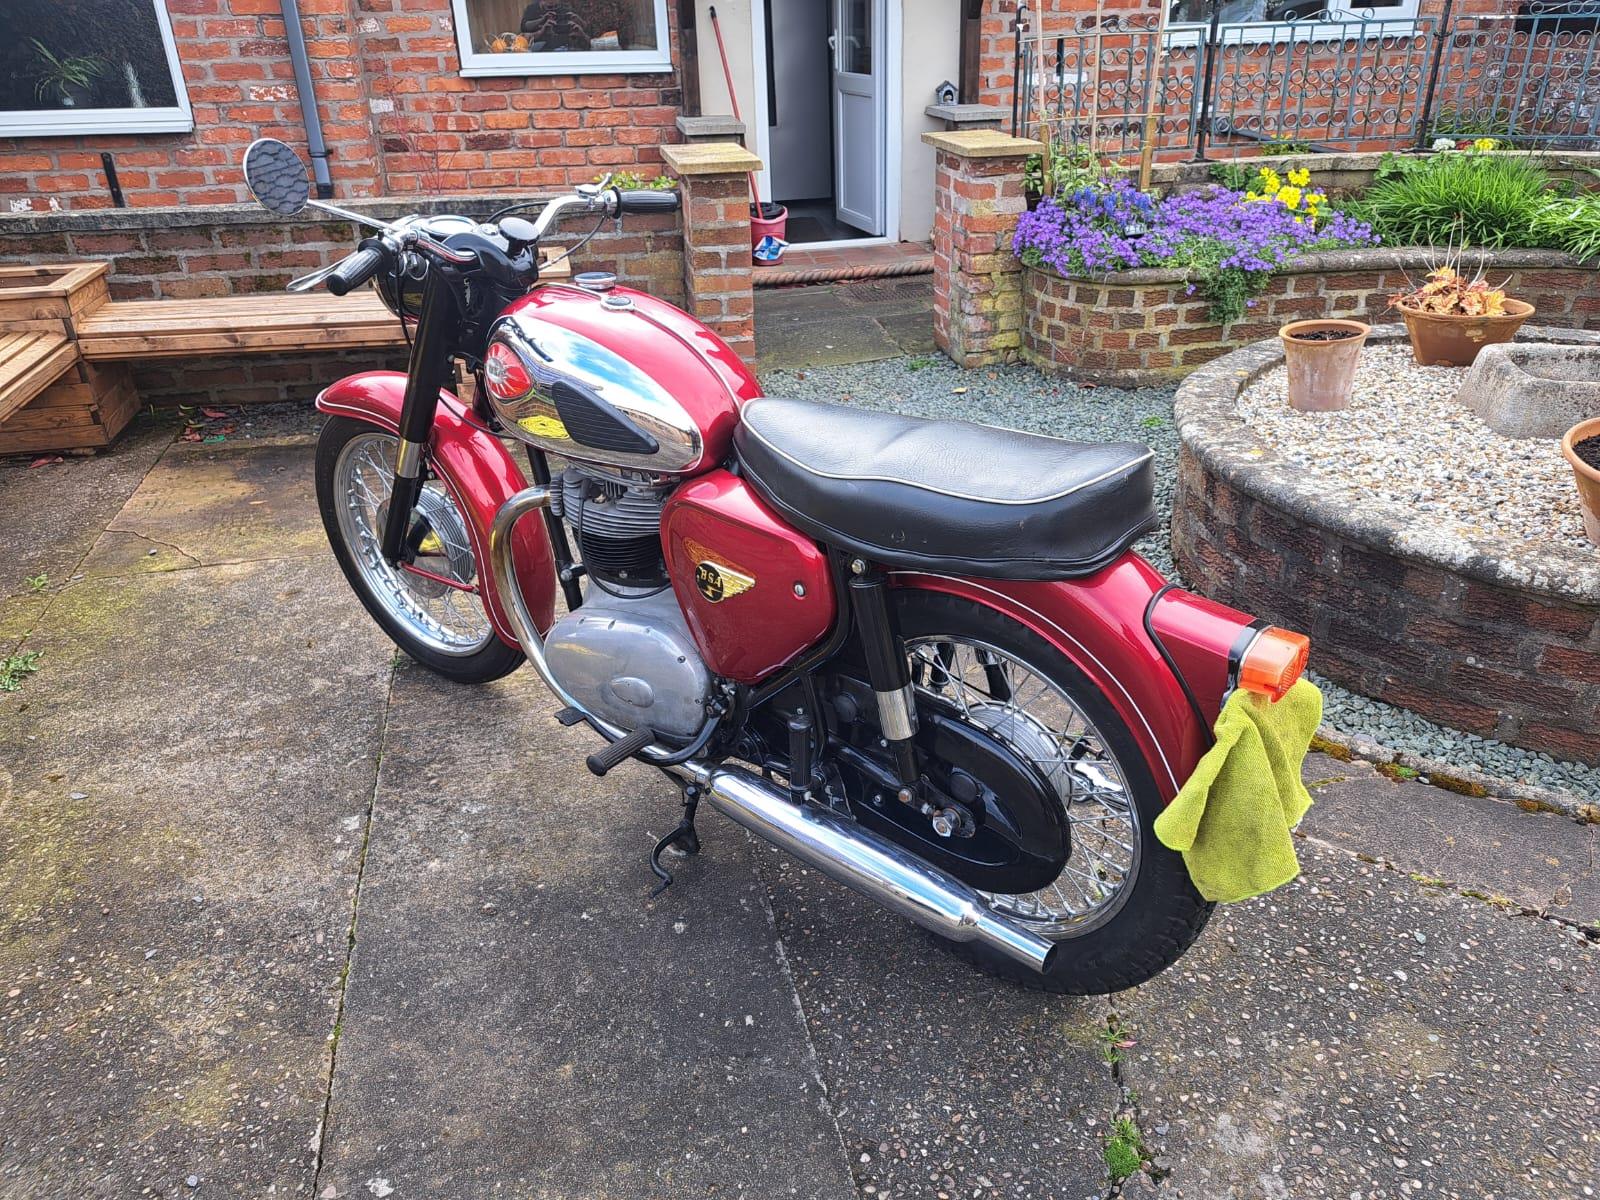 A 1964 BSA 500 TWIN MOTORCYCLE - ON A V5C, VENDOR STATES GOOD STARTER AND RUNNER, FROM A PRIVATE - Image 3 of 4